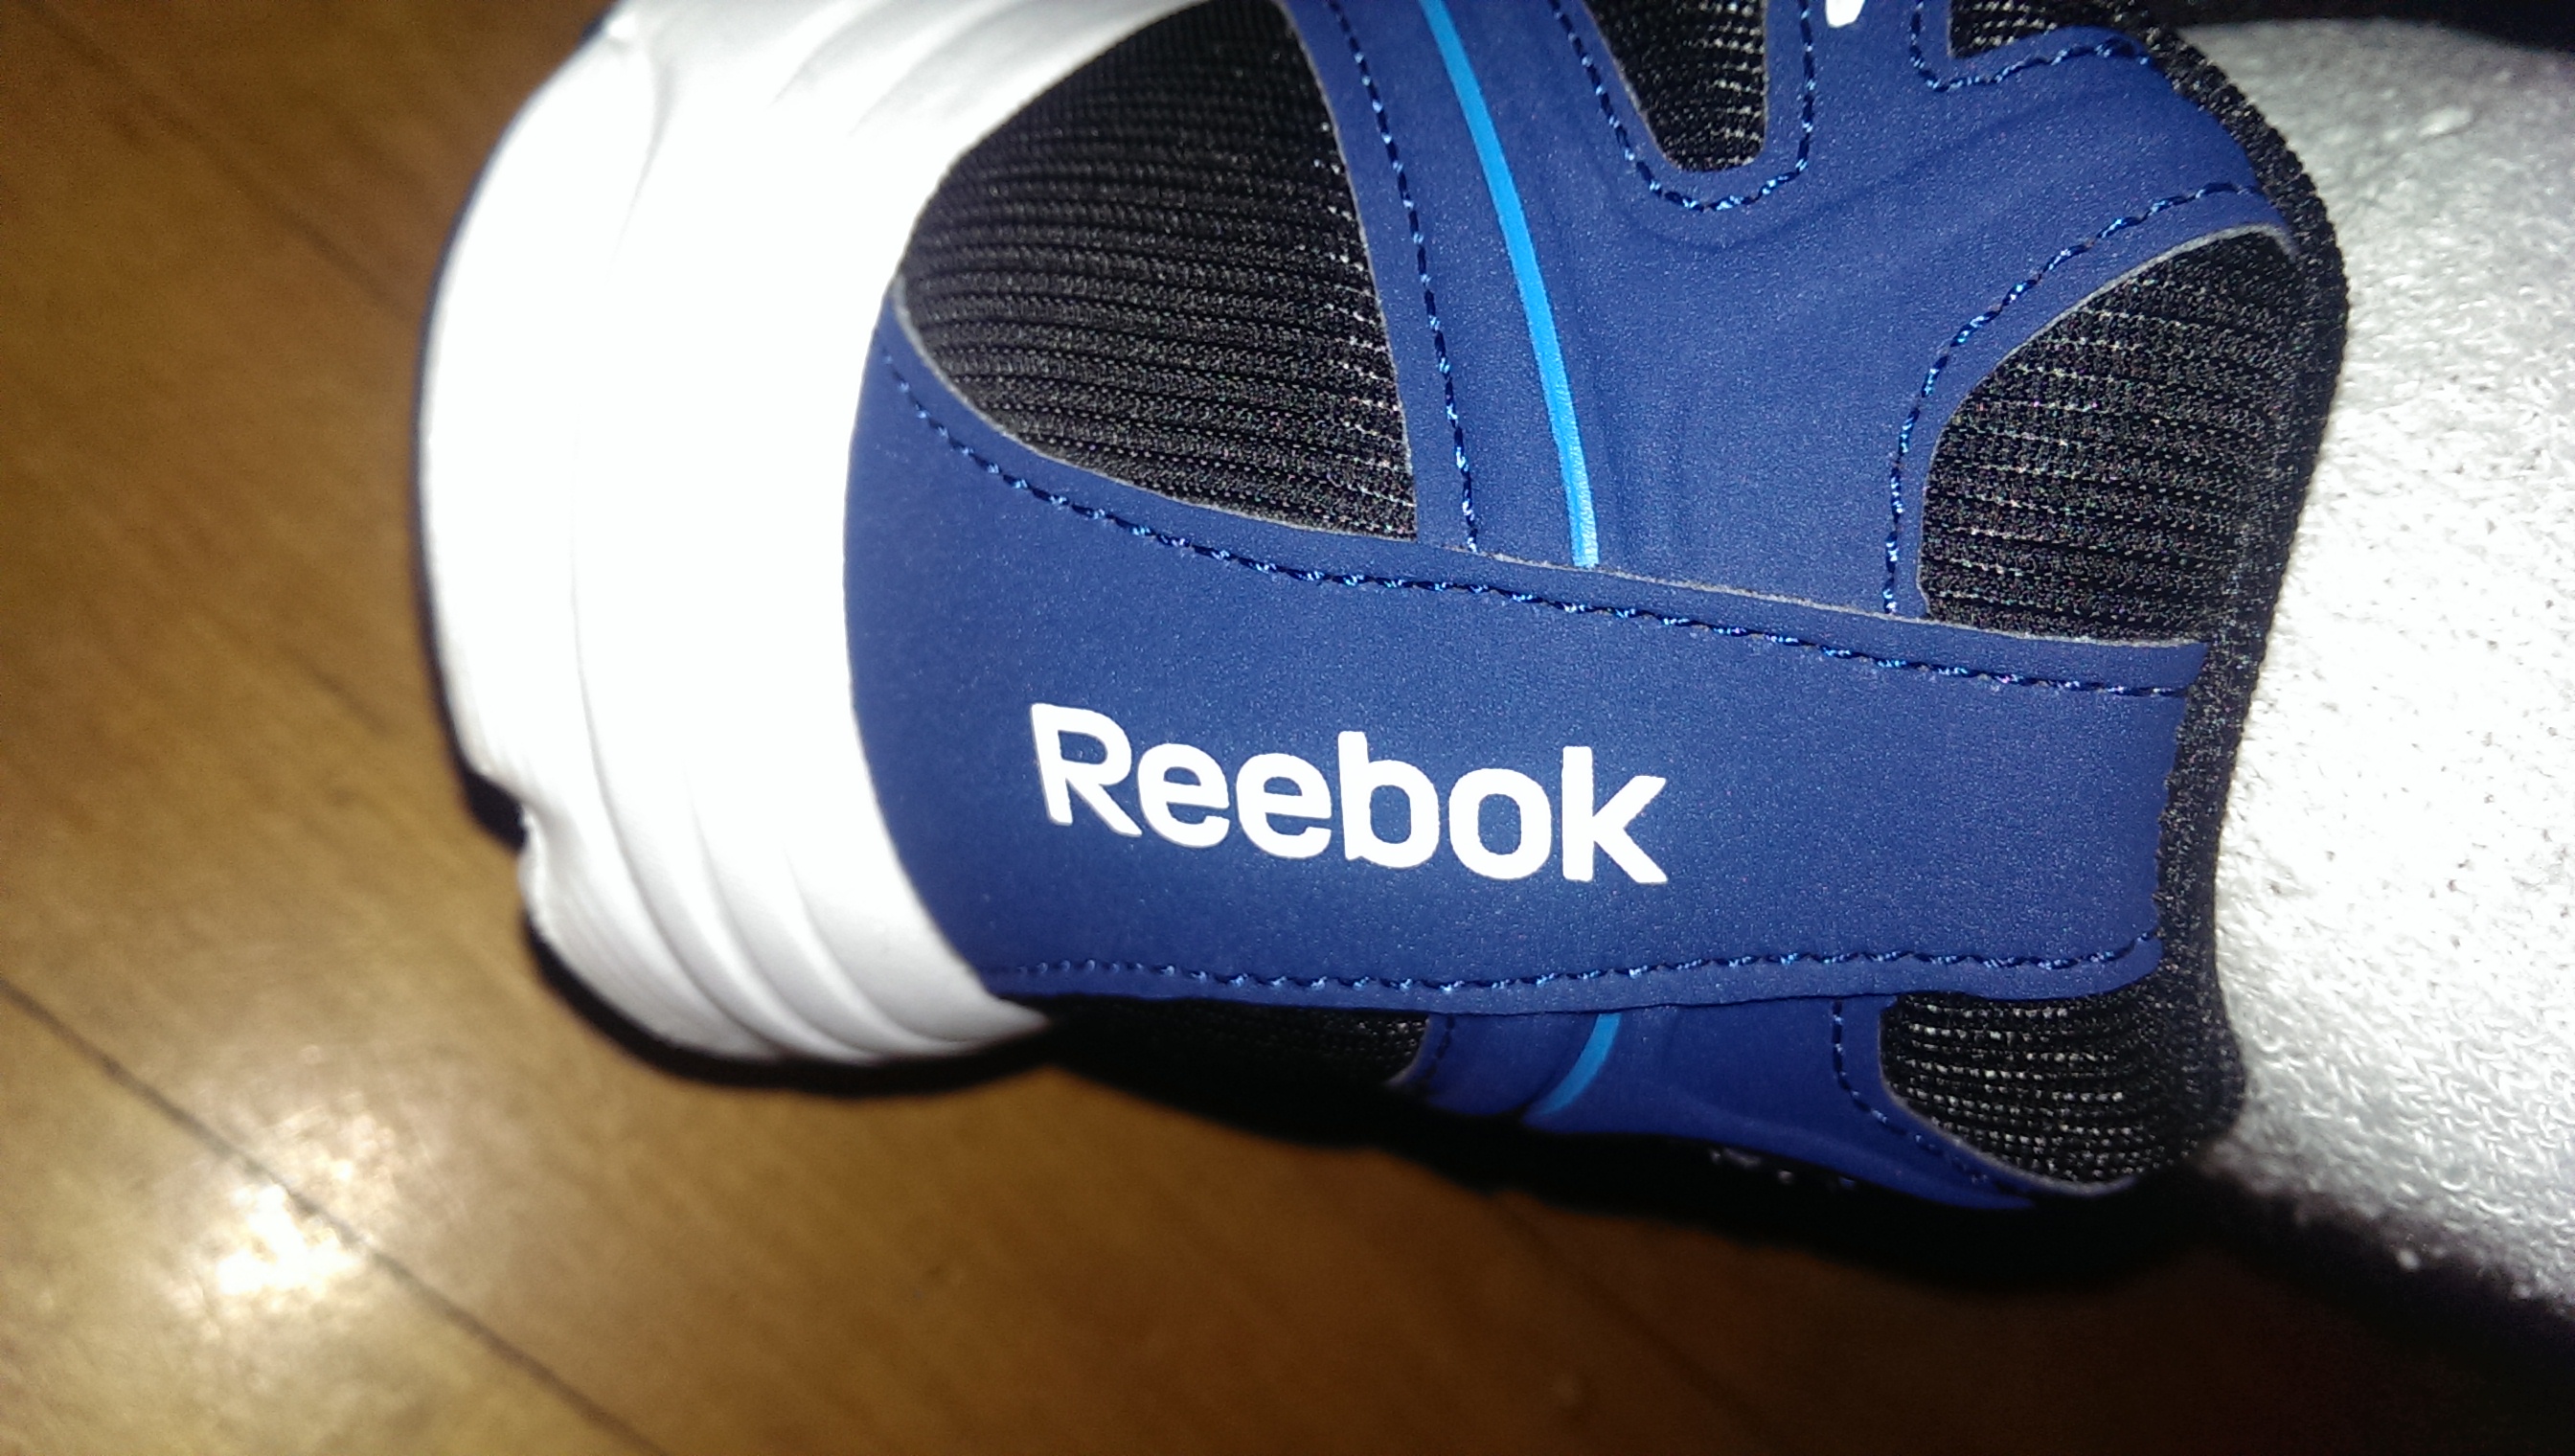 reebok company contact number